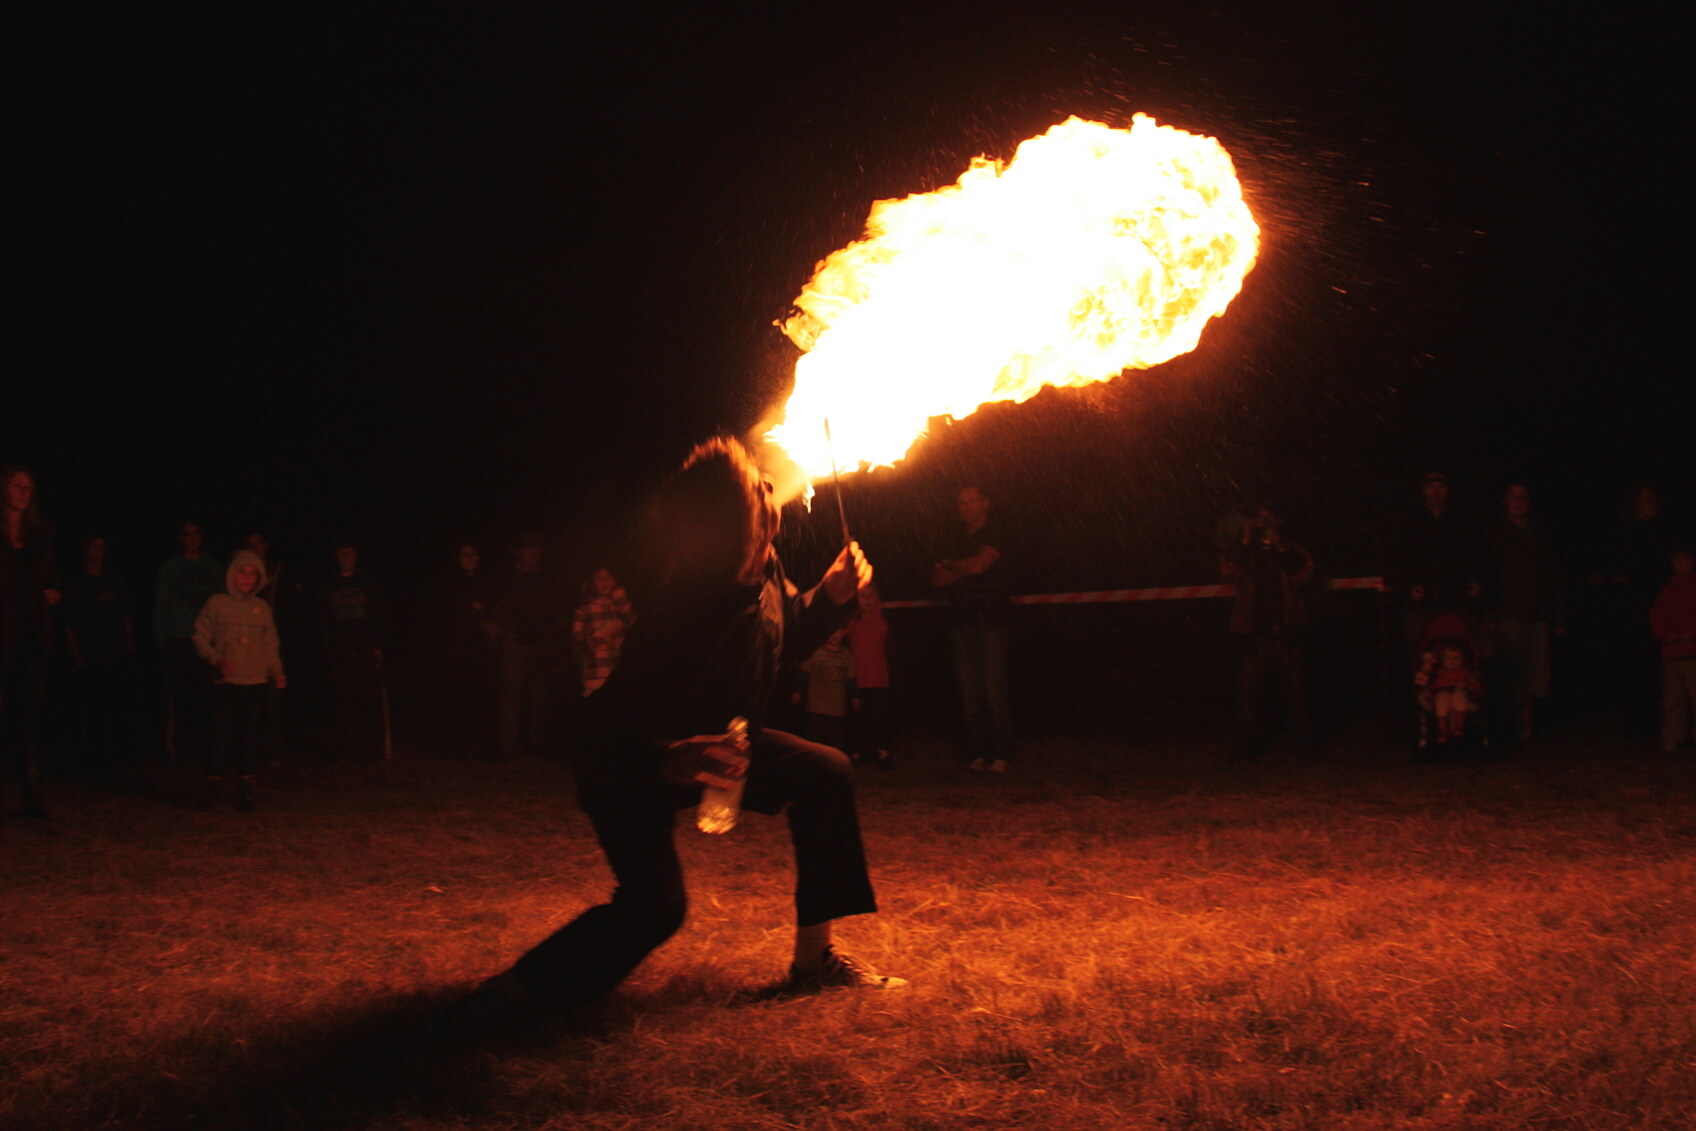 A crowd watch a fire eater perform at night at Party in the Pyrenees, Victoria